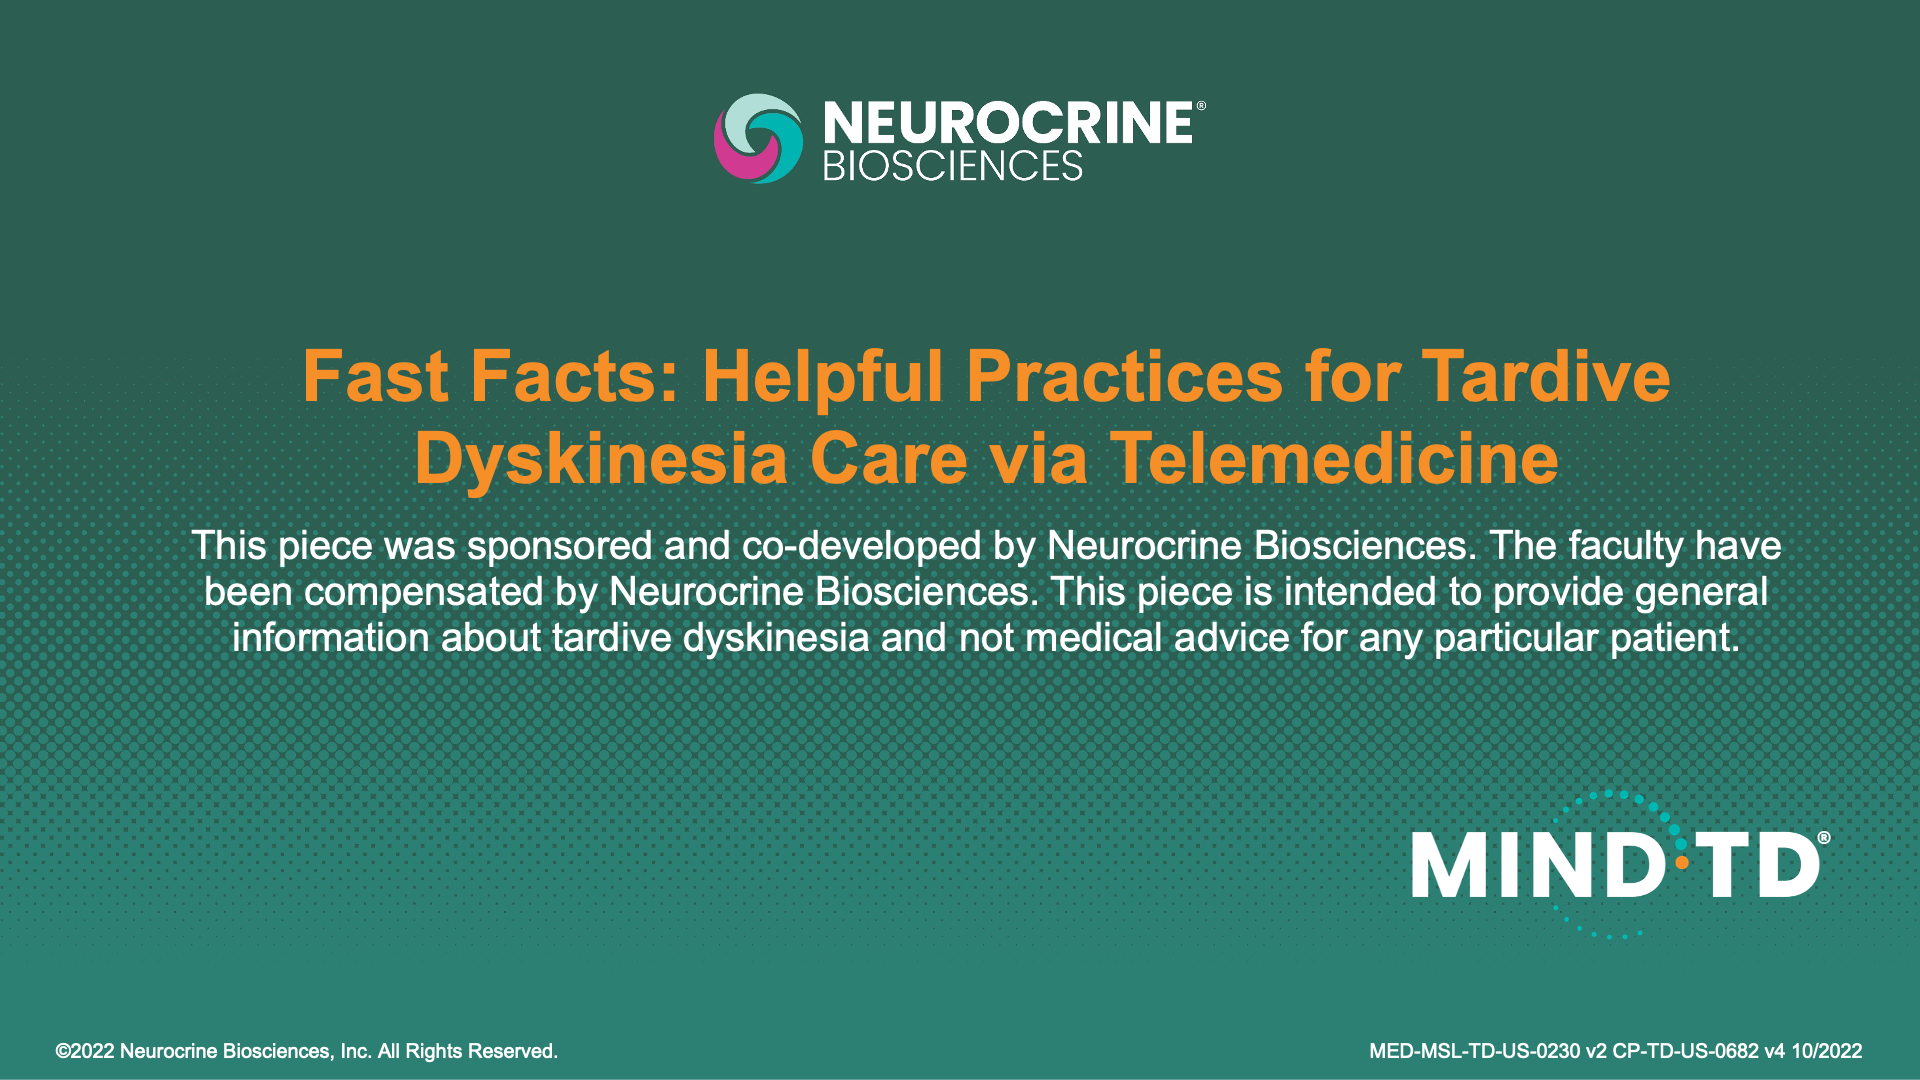 FAST FACTS: HELPFUL PRACTICES FOR TARDIVE DYSKINESIA CARE VIA TELEMEDICINE
This piece was sponsored and co-developed by Neurocrine Biosciences. The faculty have been compensated by Neurocrine Biosciences. This piece is intended to provide general information about tardive dyskinesia and not medical advice for any particular patient.
&copy;2022 Neurocrine Biosciences, Inc. All Rights Reserved.
MED-MSL-TD-US-0230 v2 CP-TD-US-0682 v4 10/2022